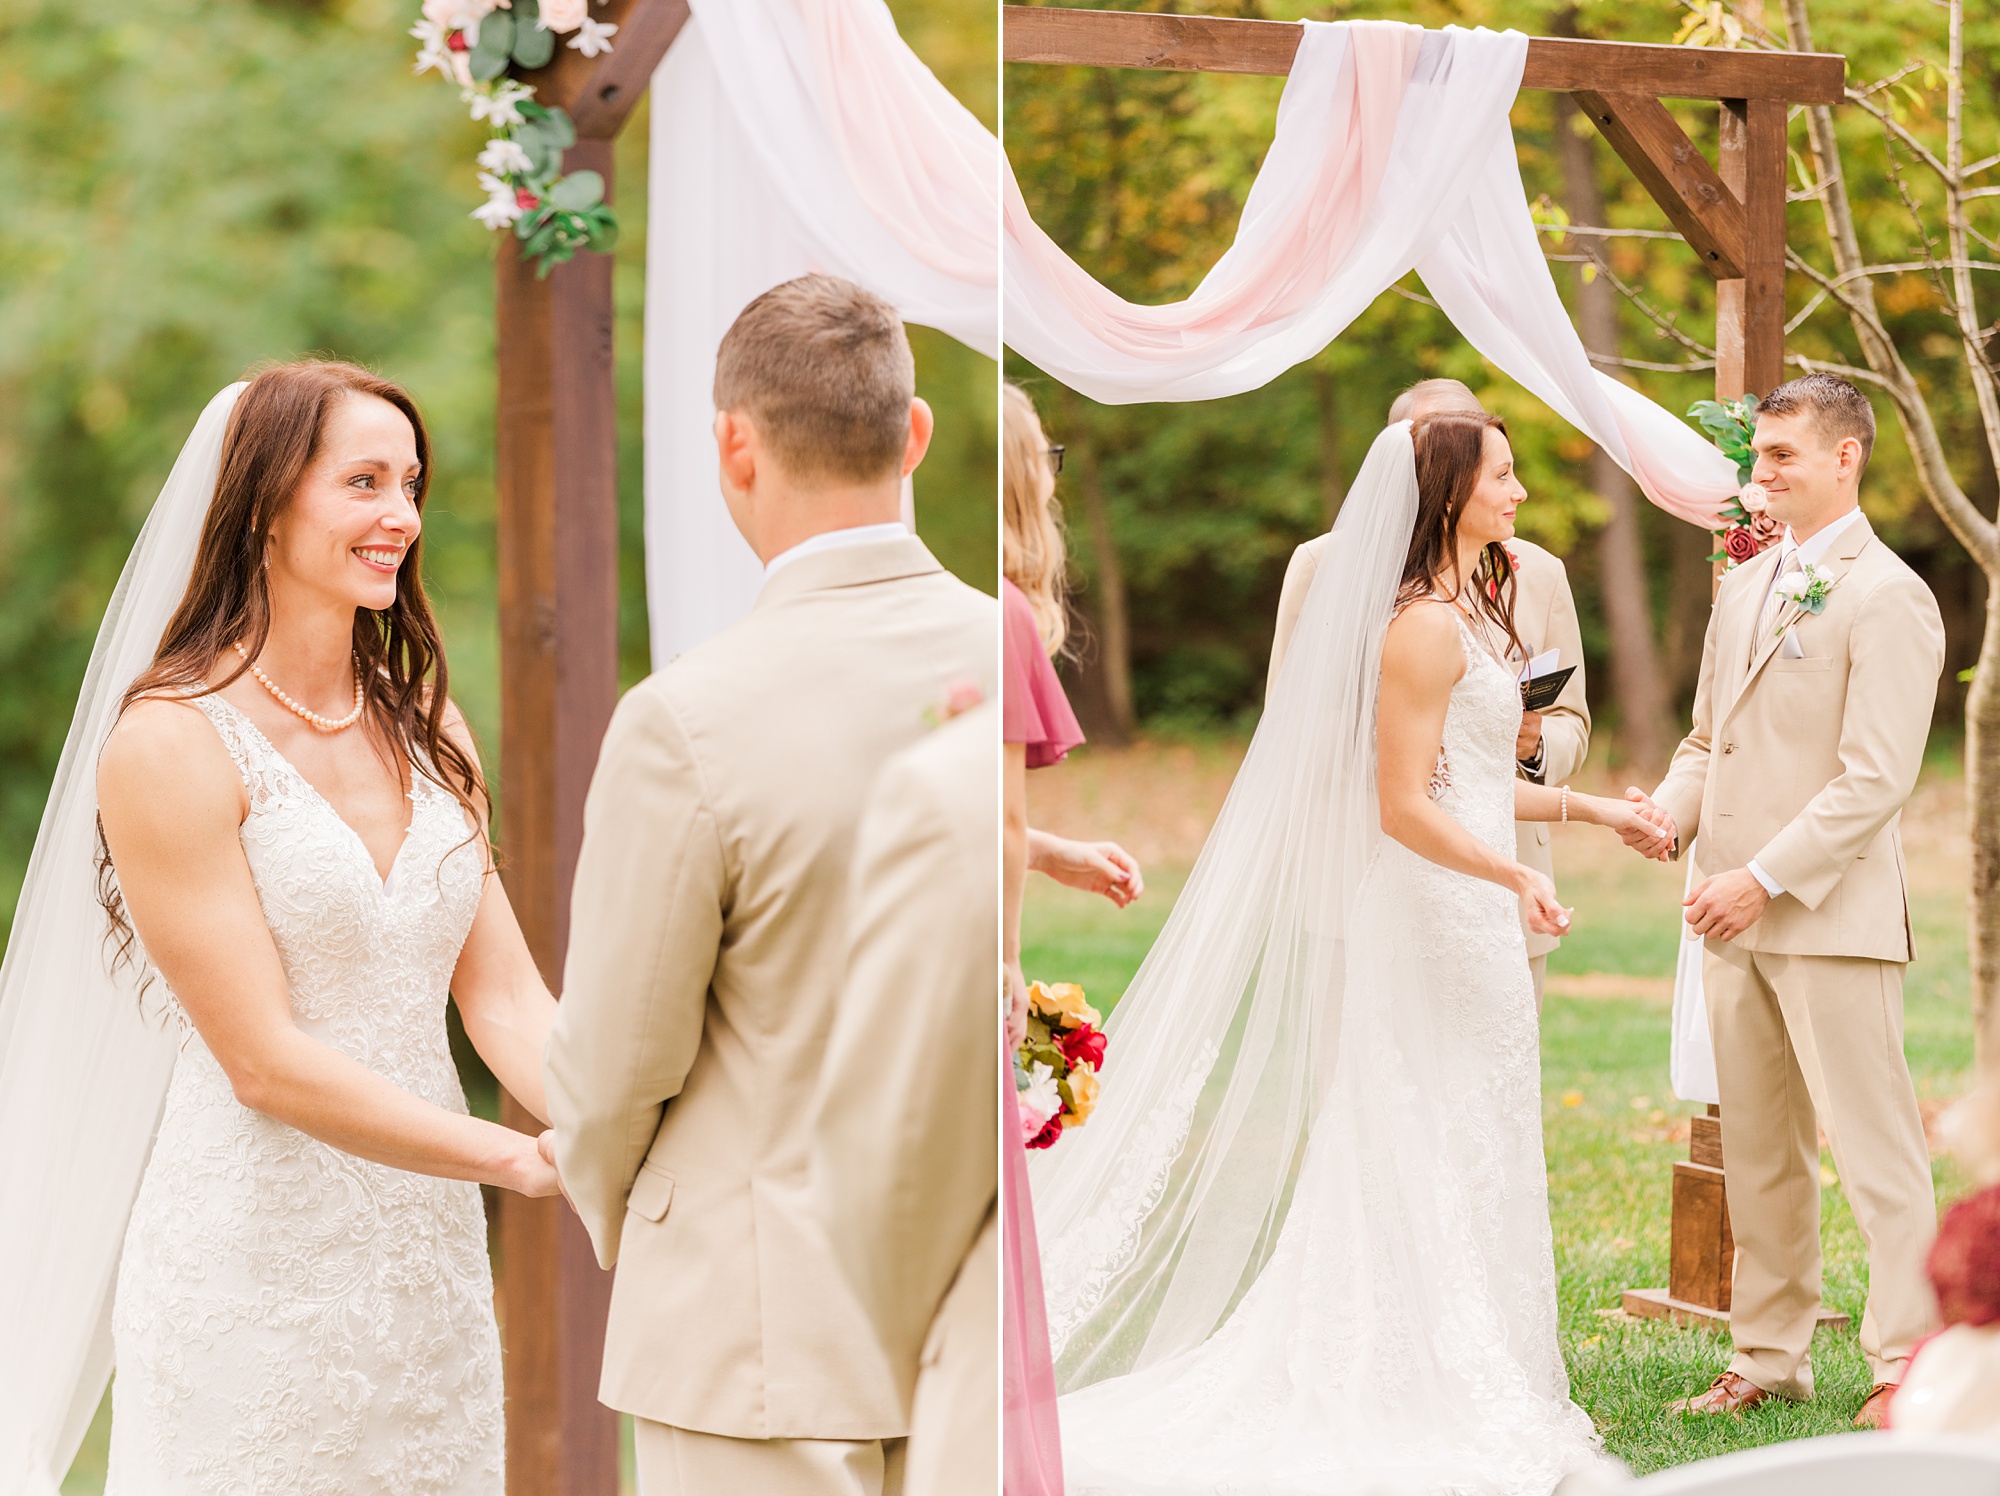 bride and groom exchange vows during backyard wedding ceremony